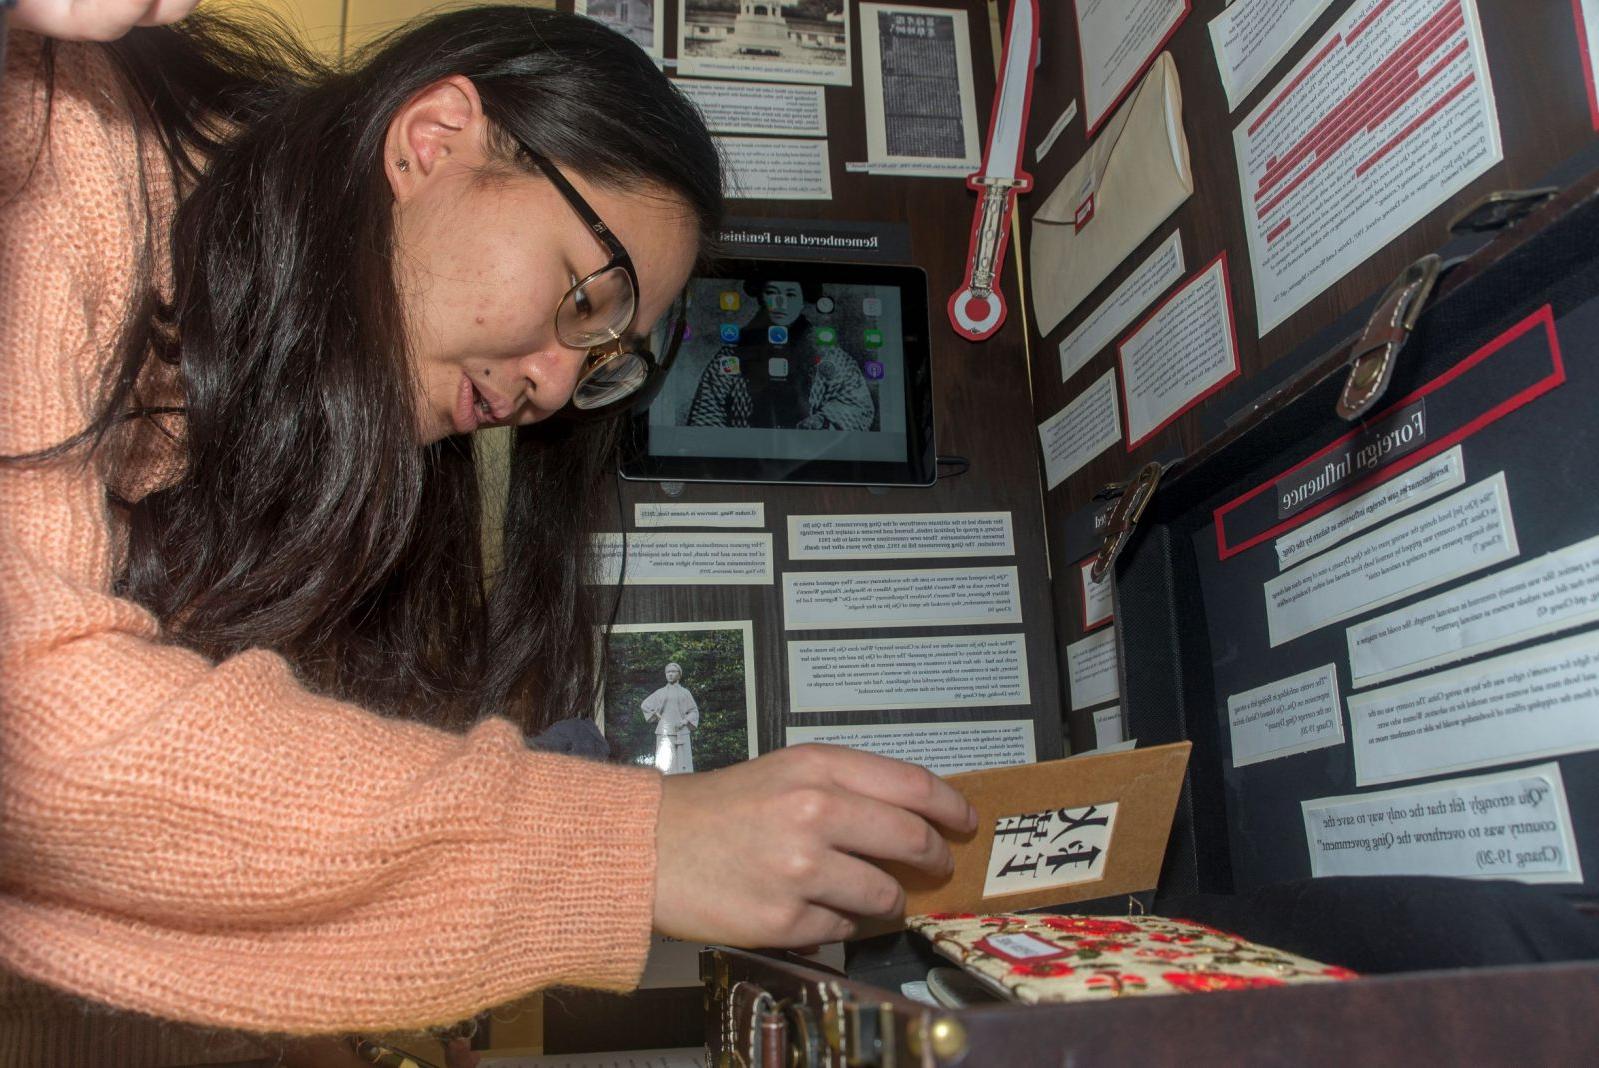 A student opens a booklet to read, which is part of a display at the base of an exhibit board.